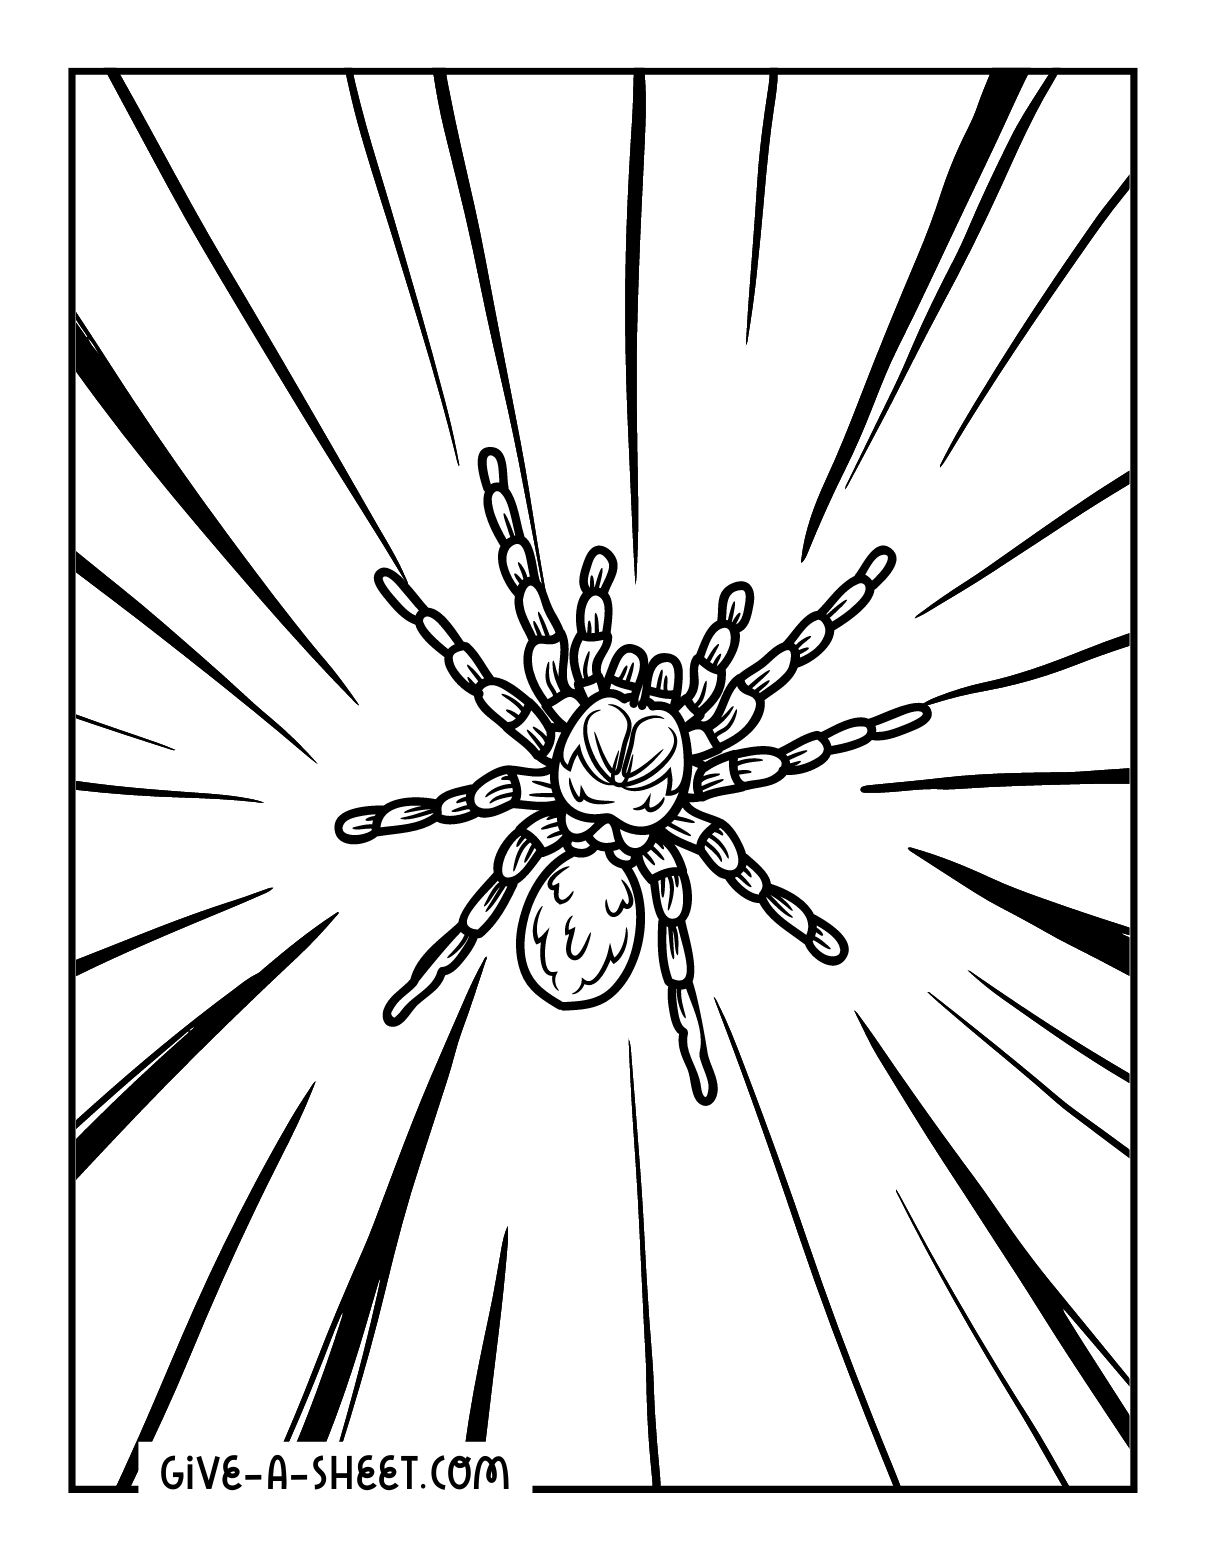 Scary tarantula spider coloring pages for kids.